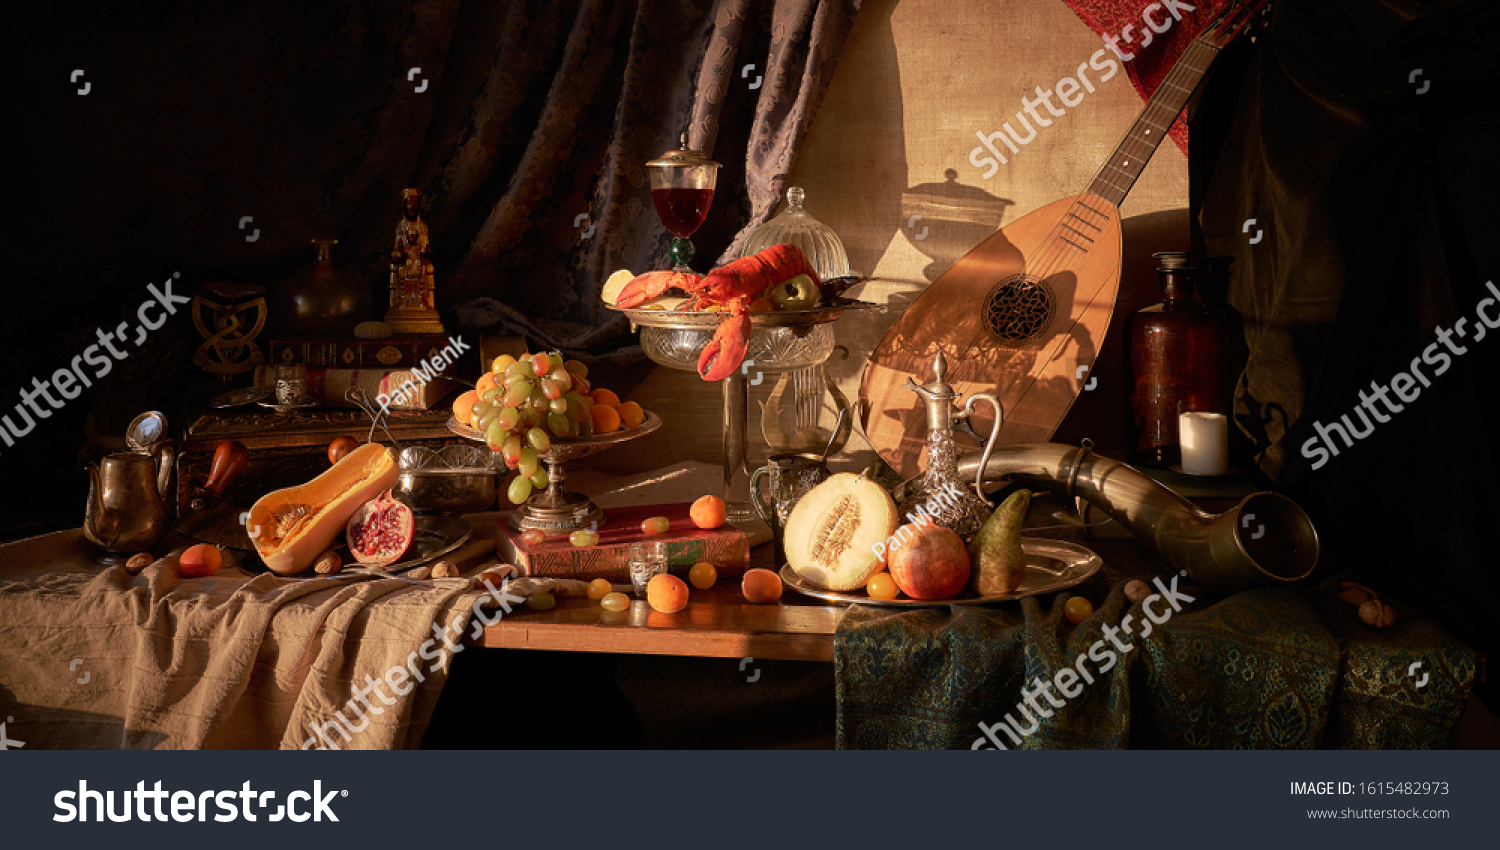 Still life in old masters style with lobster, glass of wine, silver dishes, fruits, guitar lute and hunting horn.             #1615482973